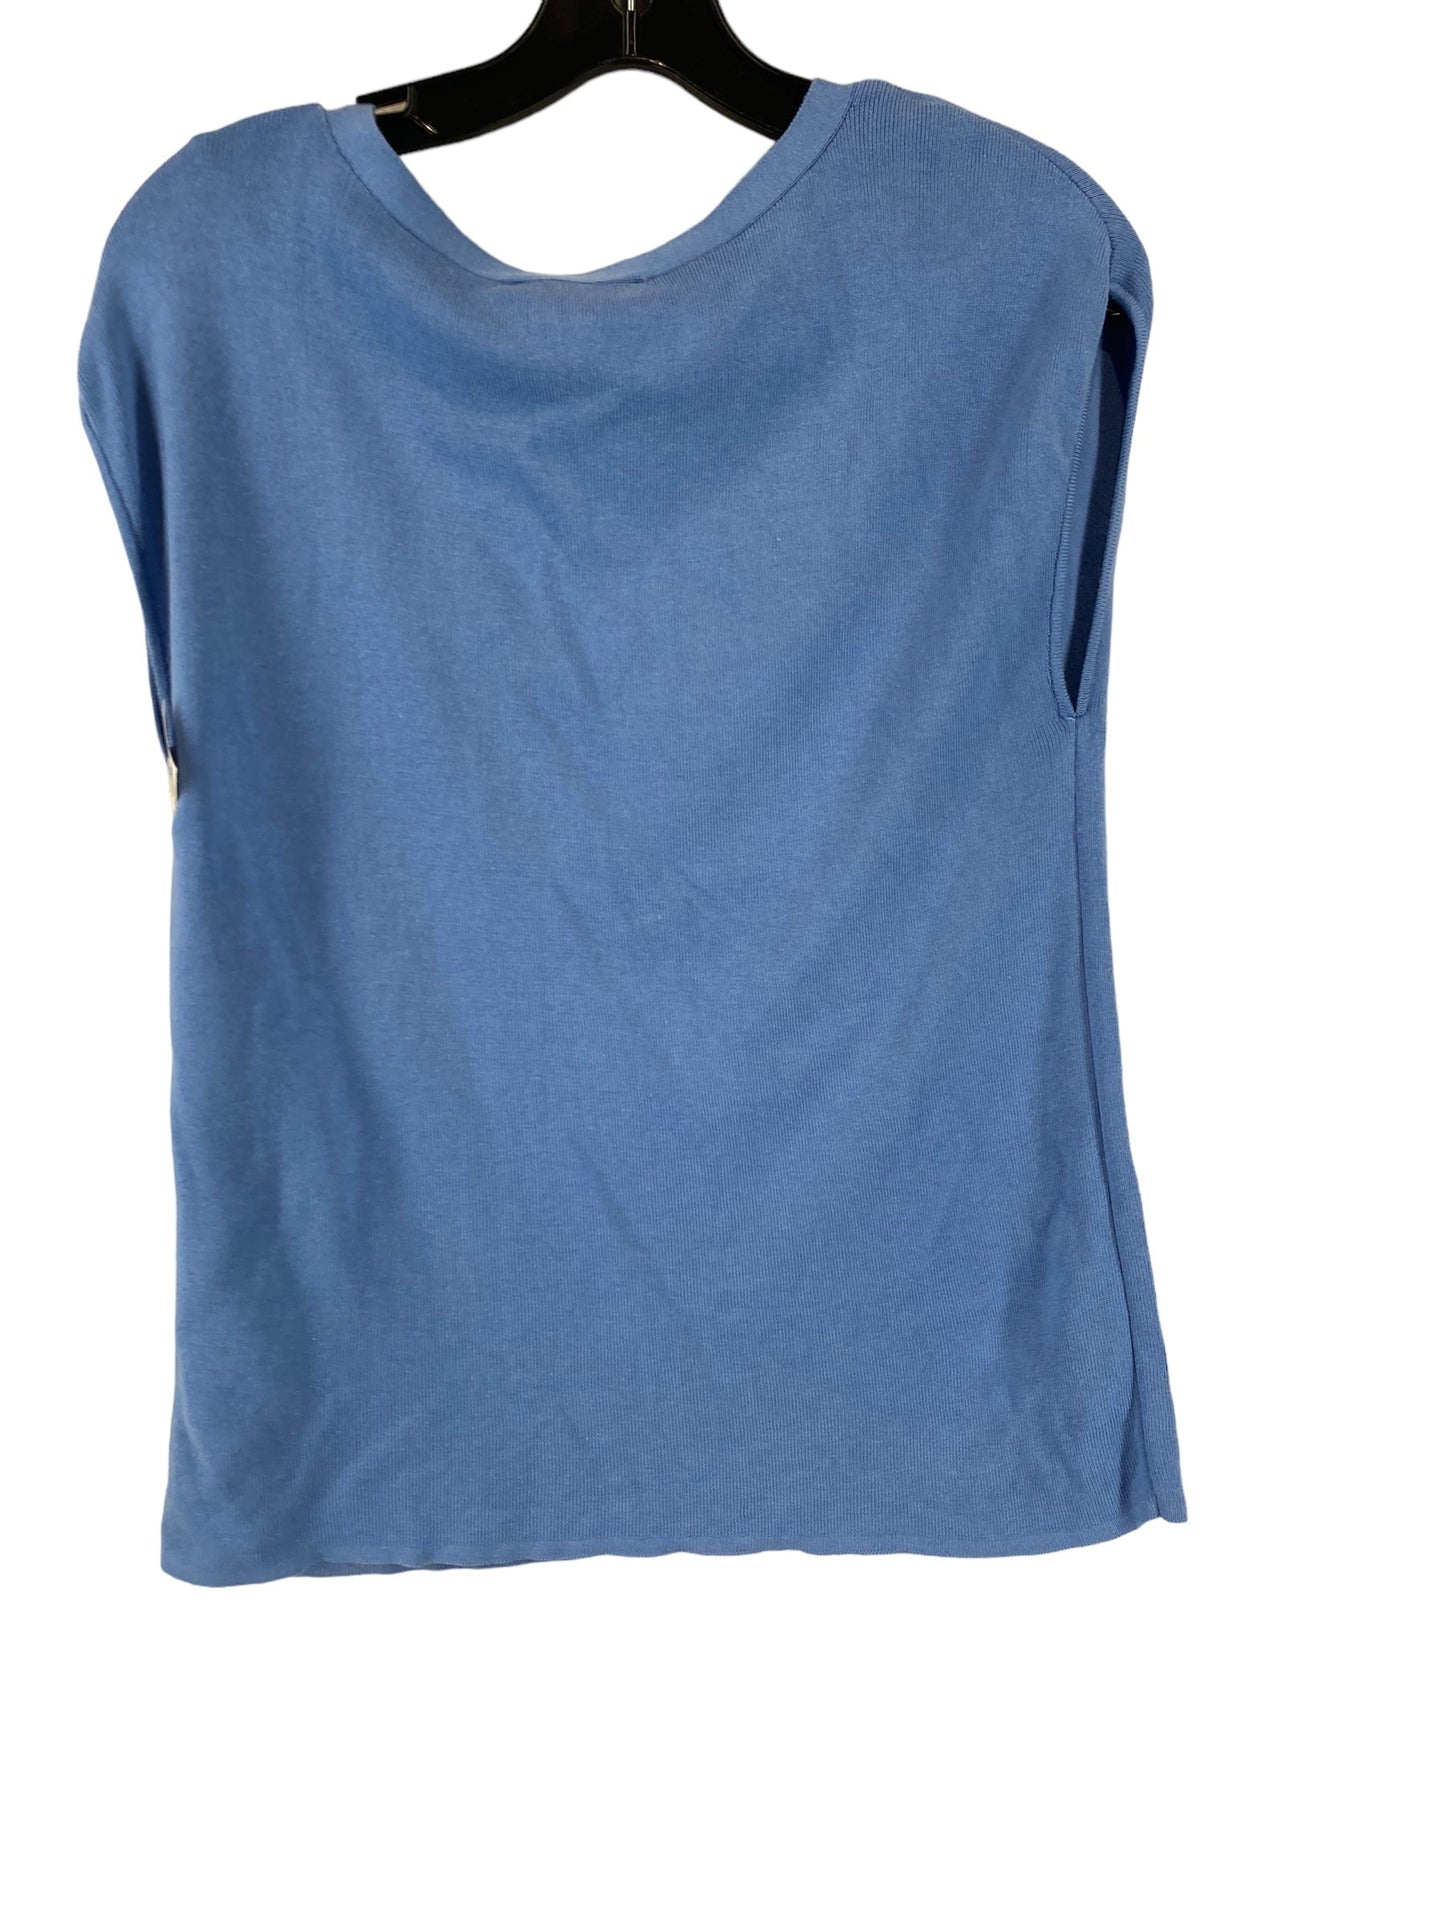 Blue Top Sleeveless Coldwater Creek, Size L